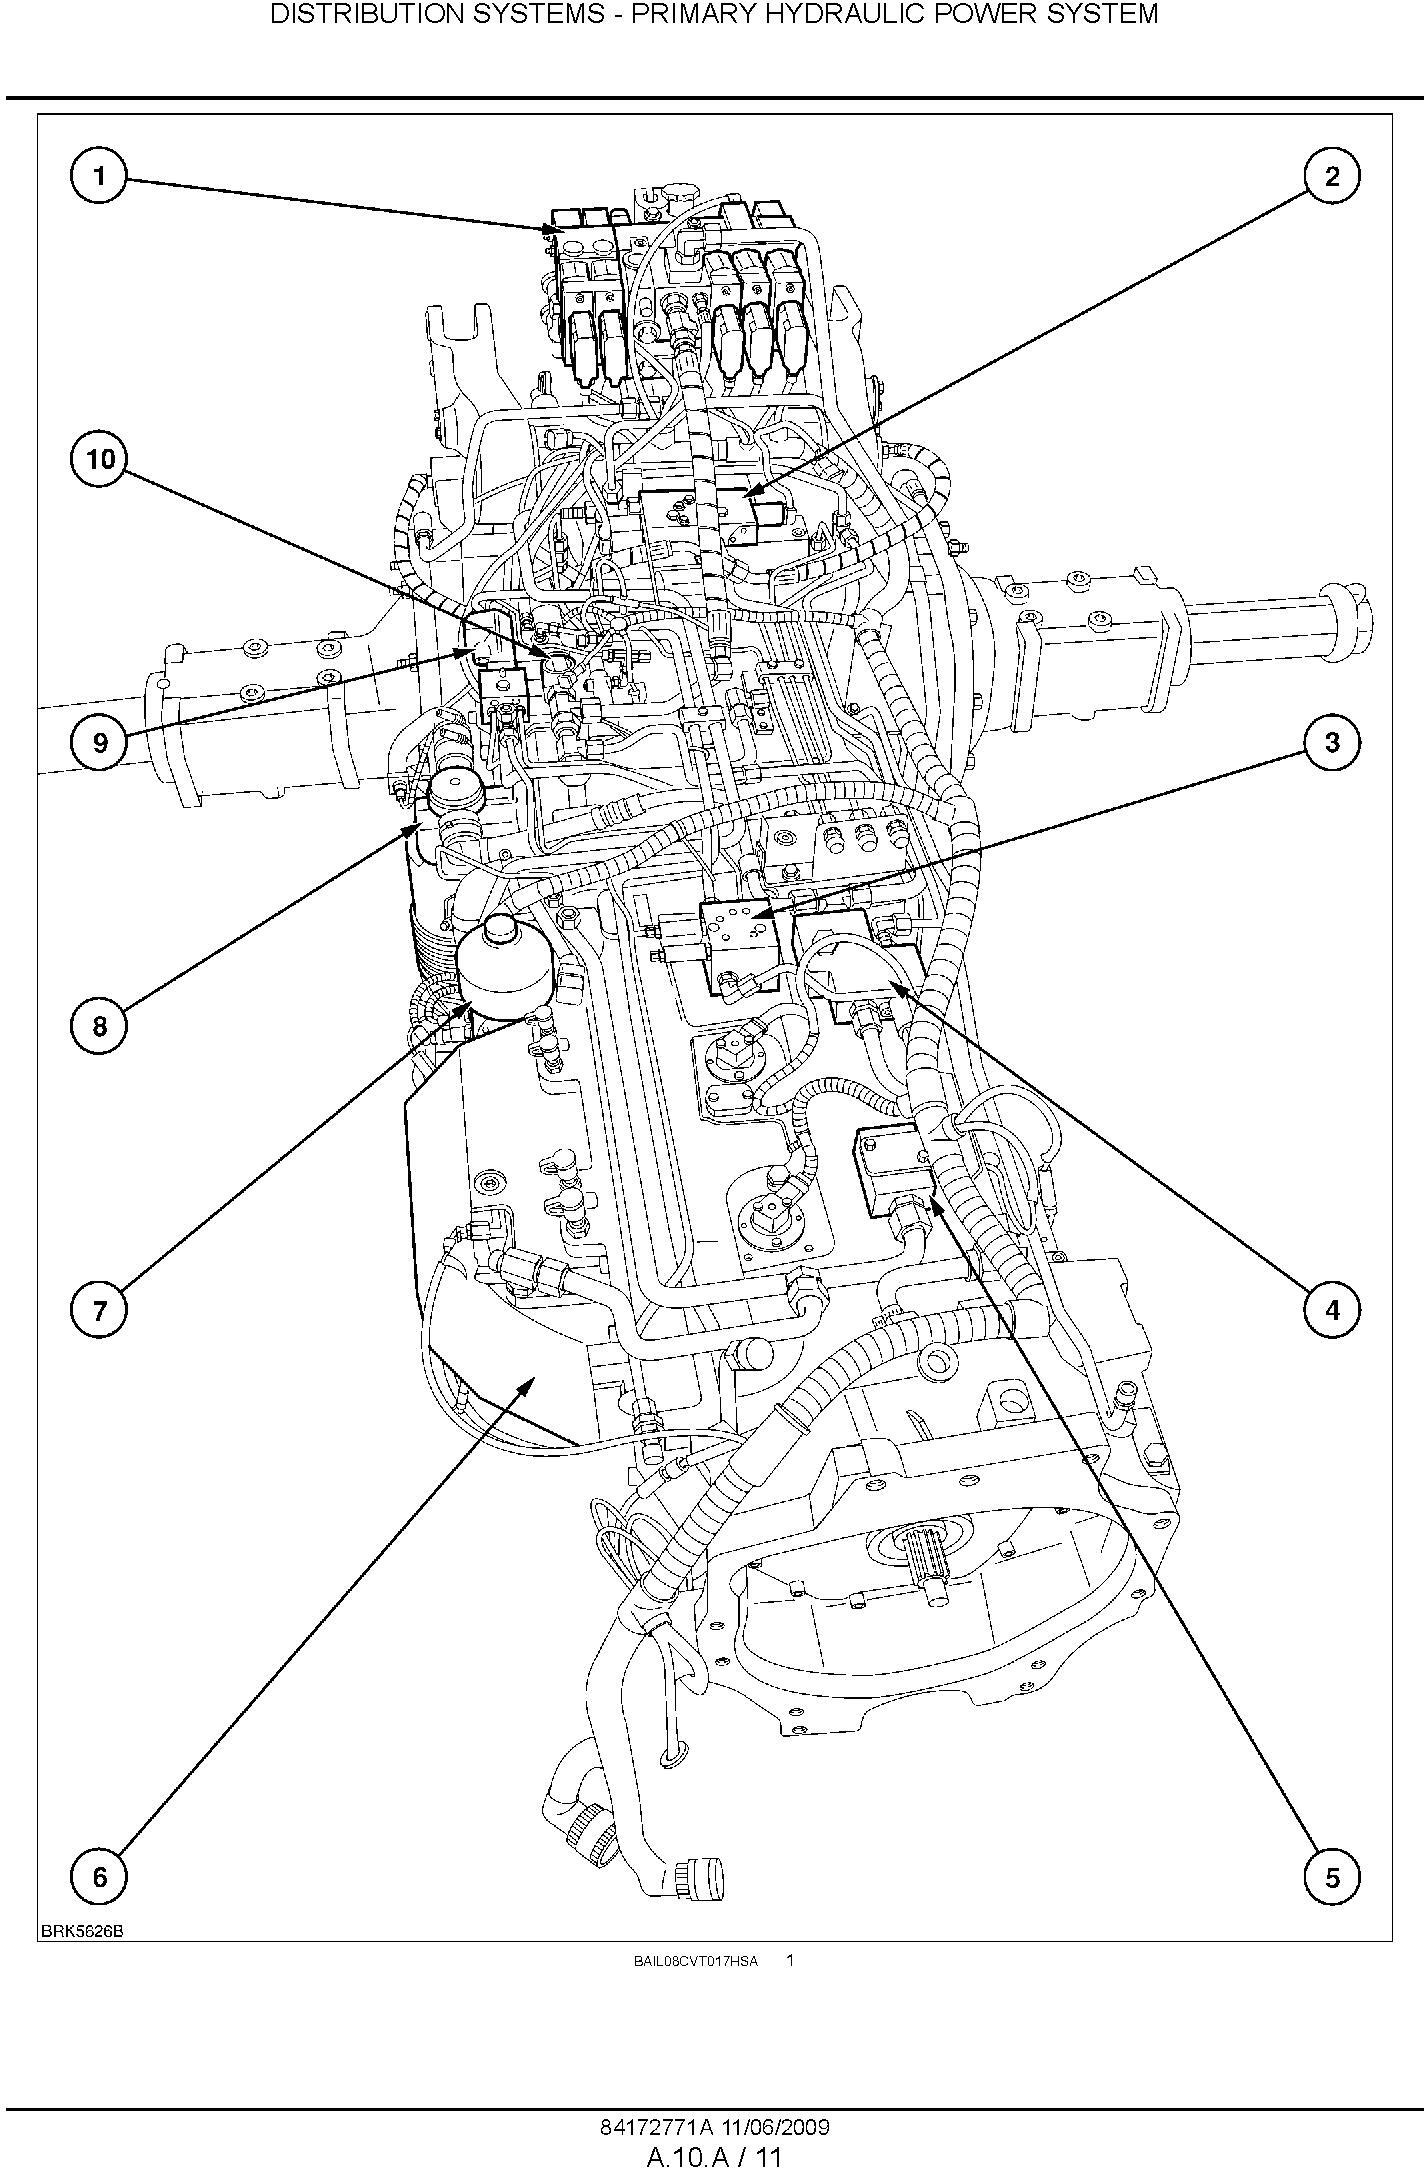 New Holland T7030, T7040, T7050, T7060, T7070 Auto Command CVT Tractor Service Manual - 1